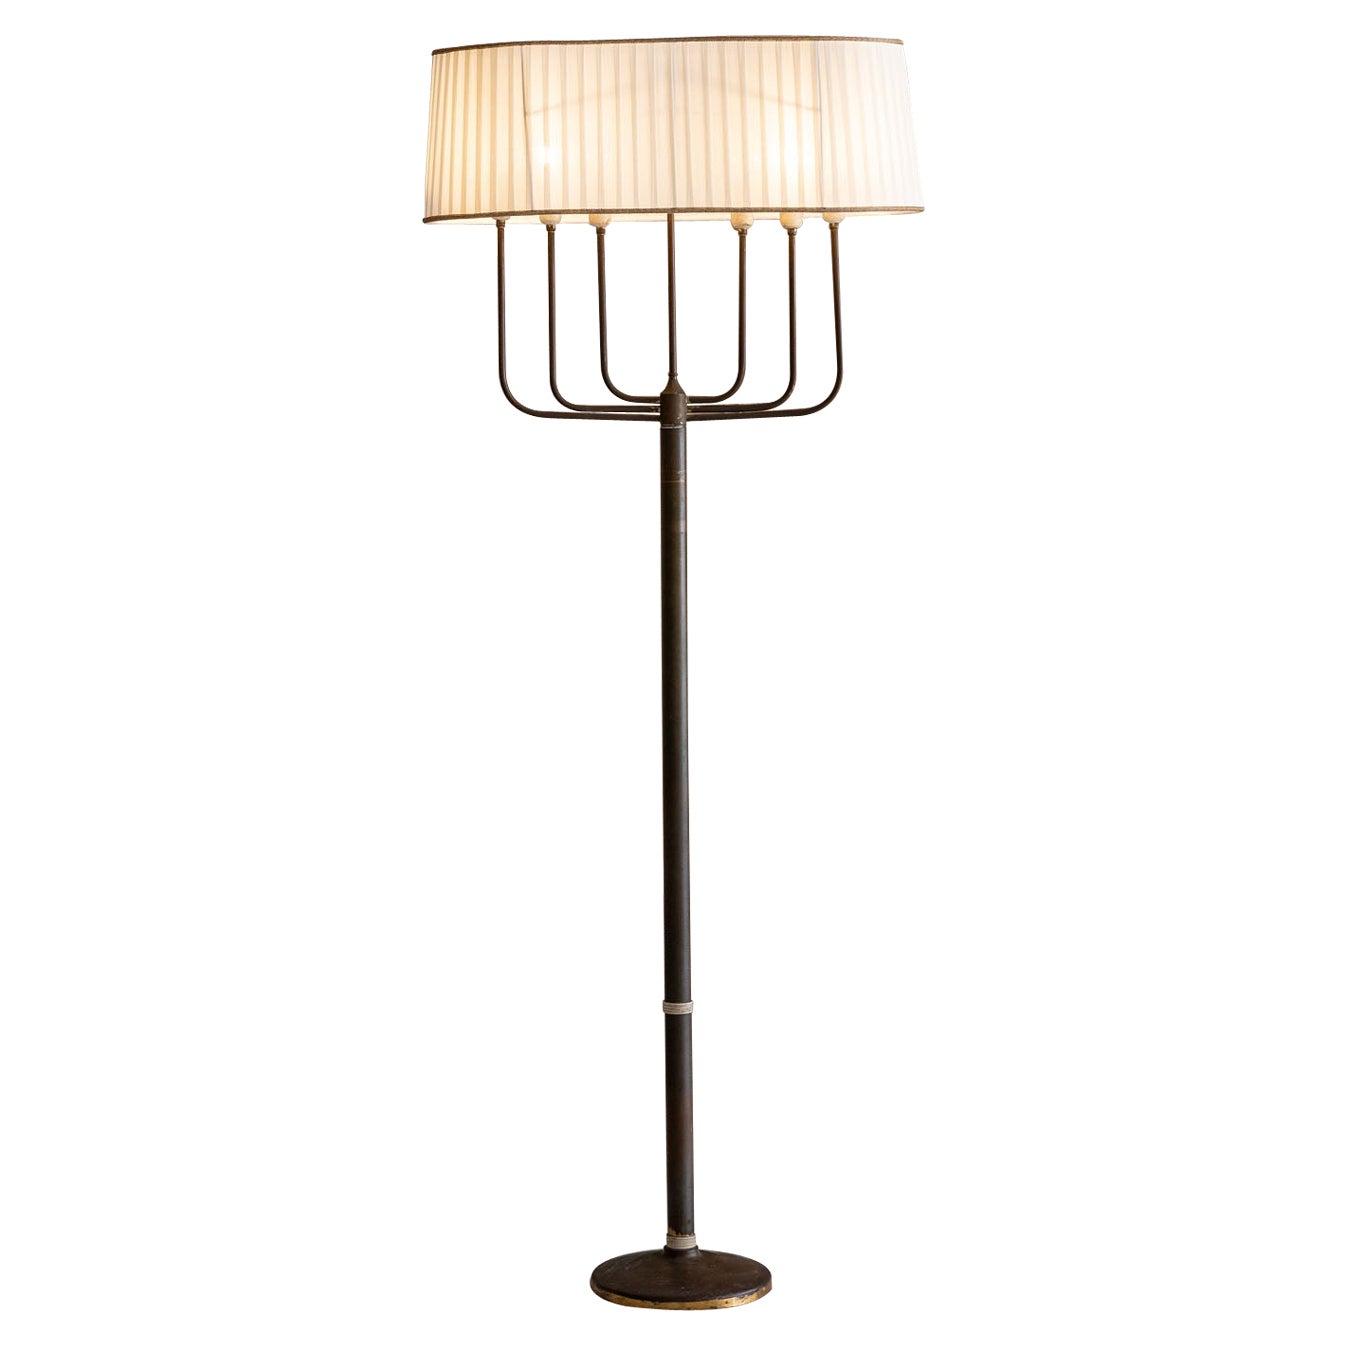 Mid Century Floor Lamp with Candelabra Arms from the '40s For Sale